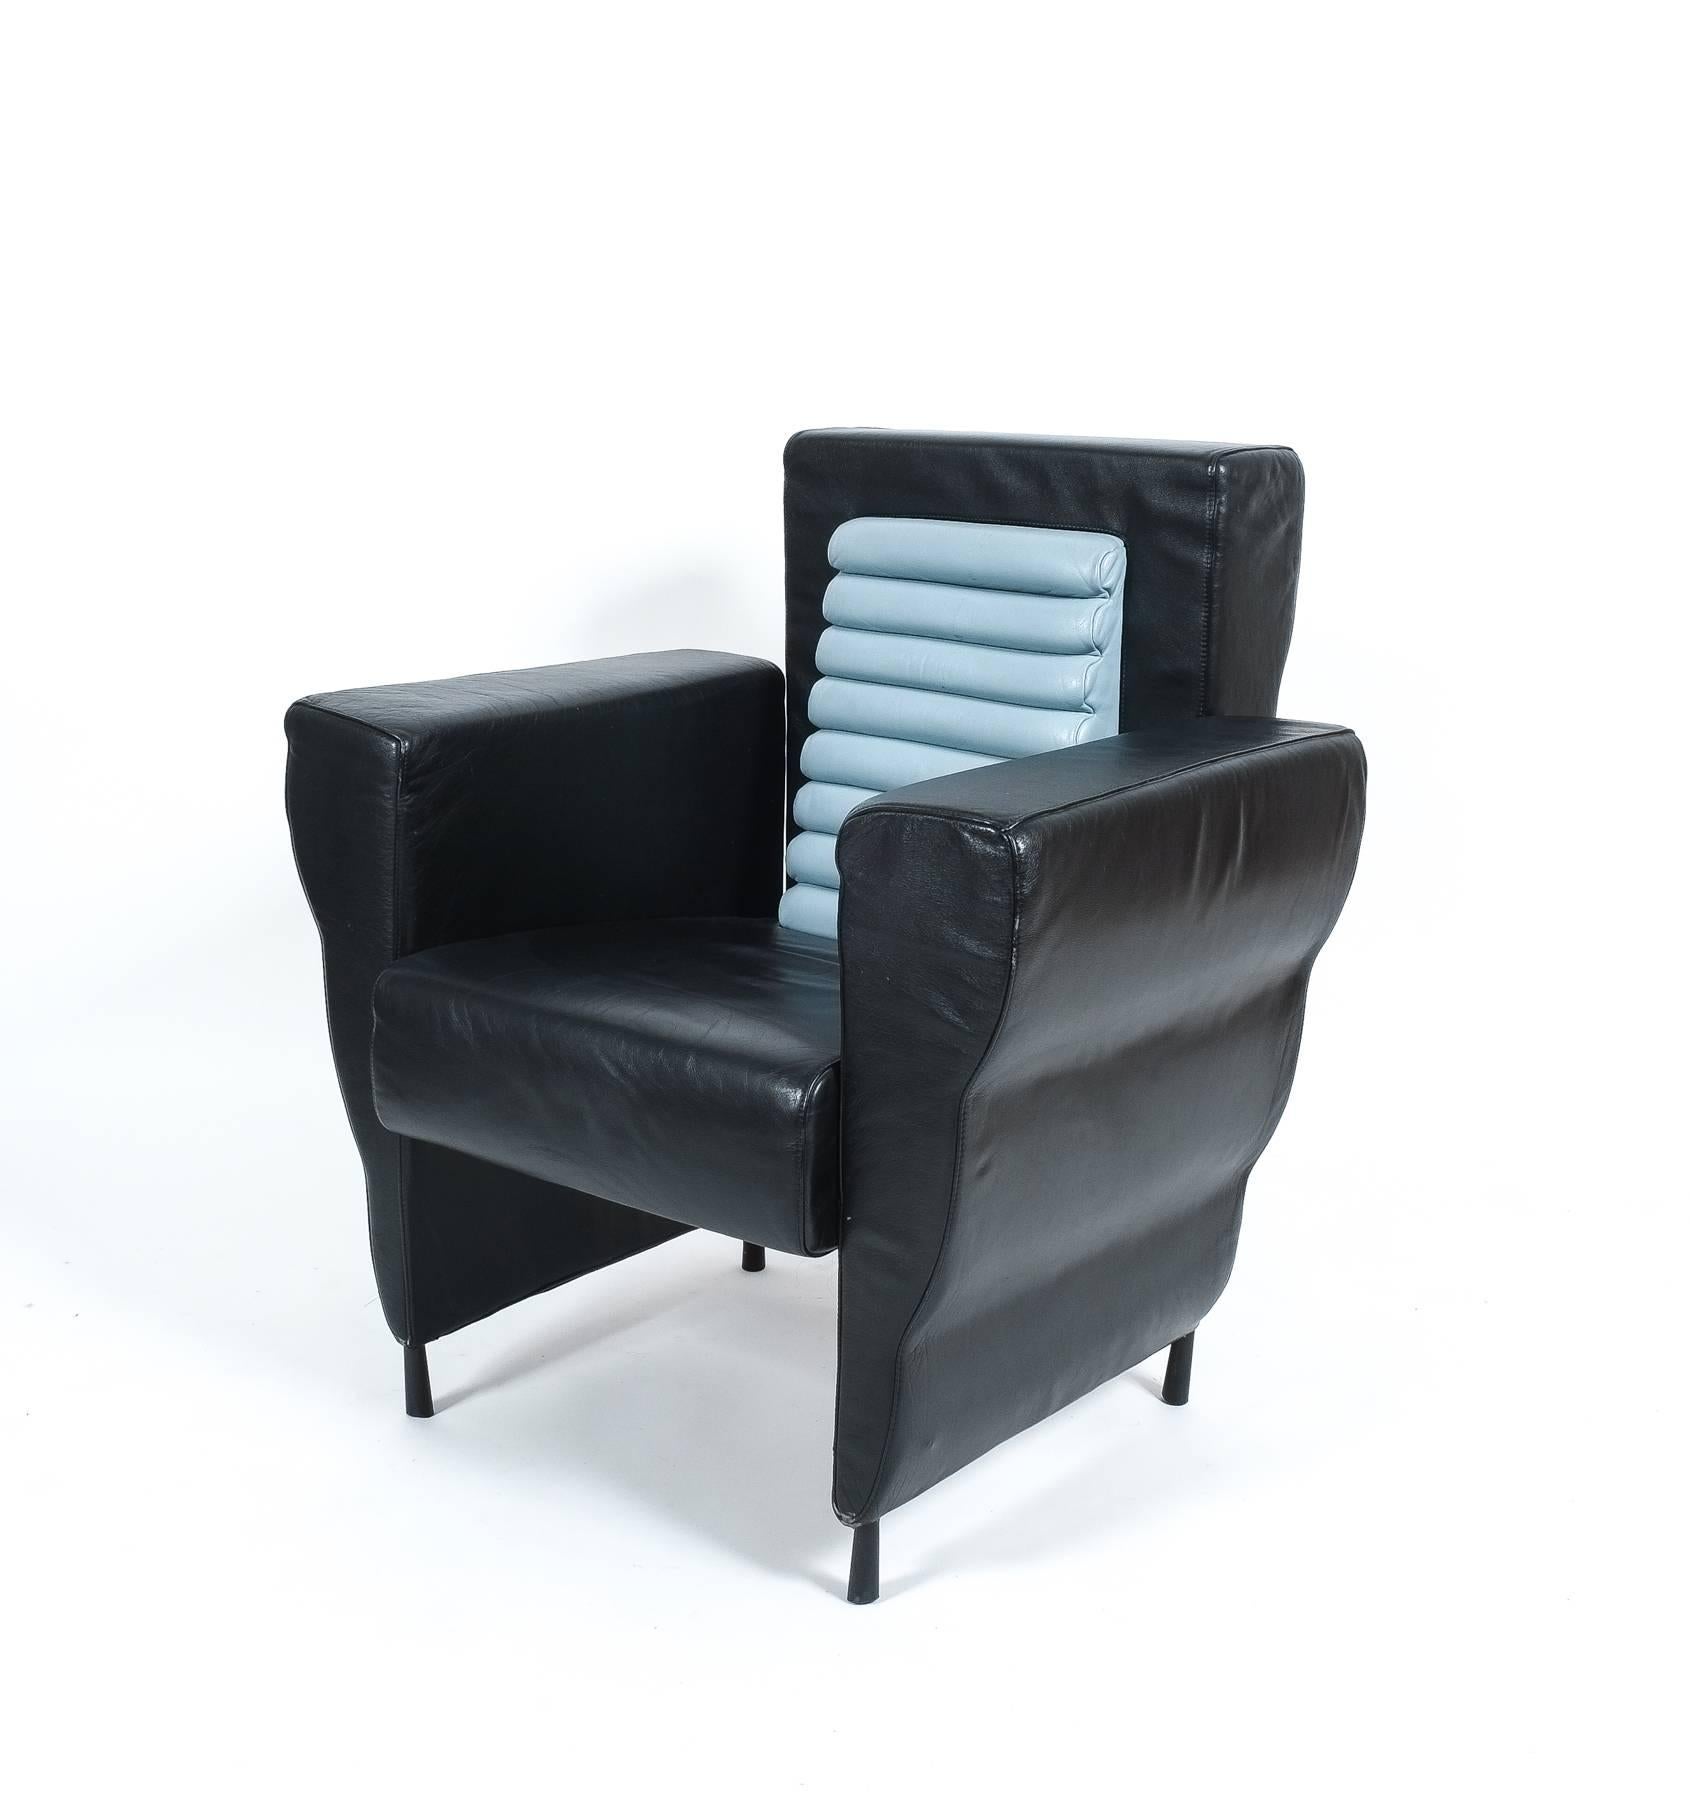 Rare leather armchair from the Flessuosa series by Ugo La Pietra for Busnelli, Italy, 1985. Comfortable smooth leather seater with a blueish grey leather inset from one of the former founding members of famous Italian avant-garde group Archizoom. We